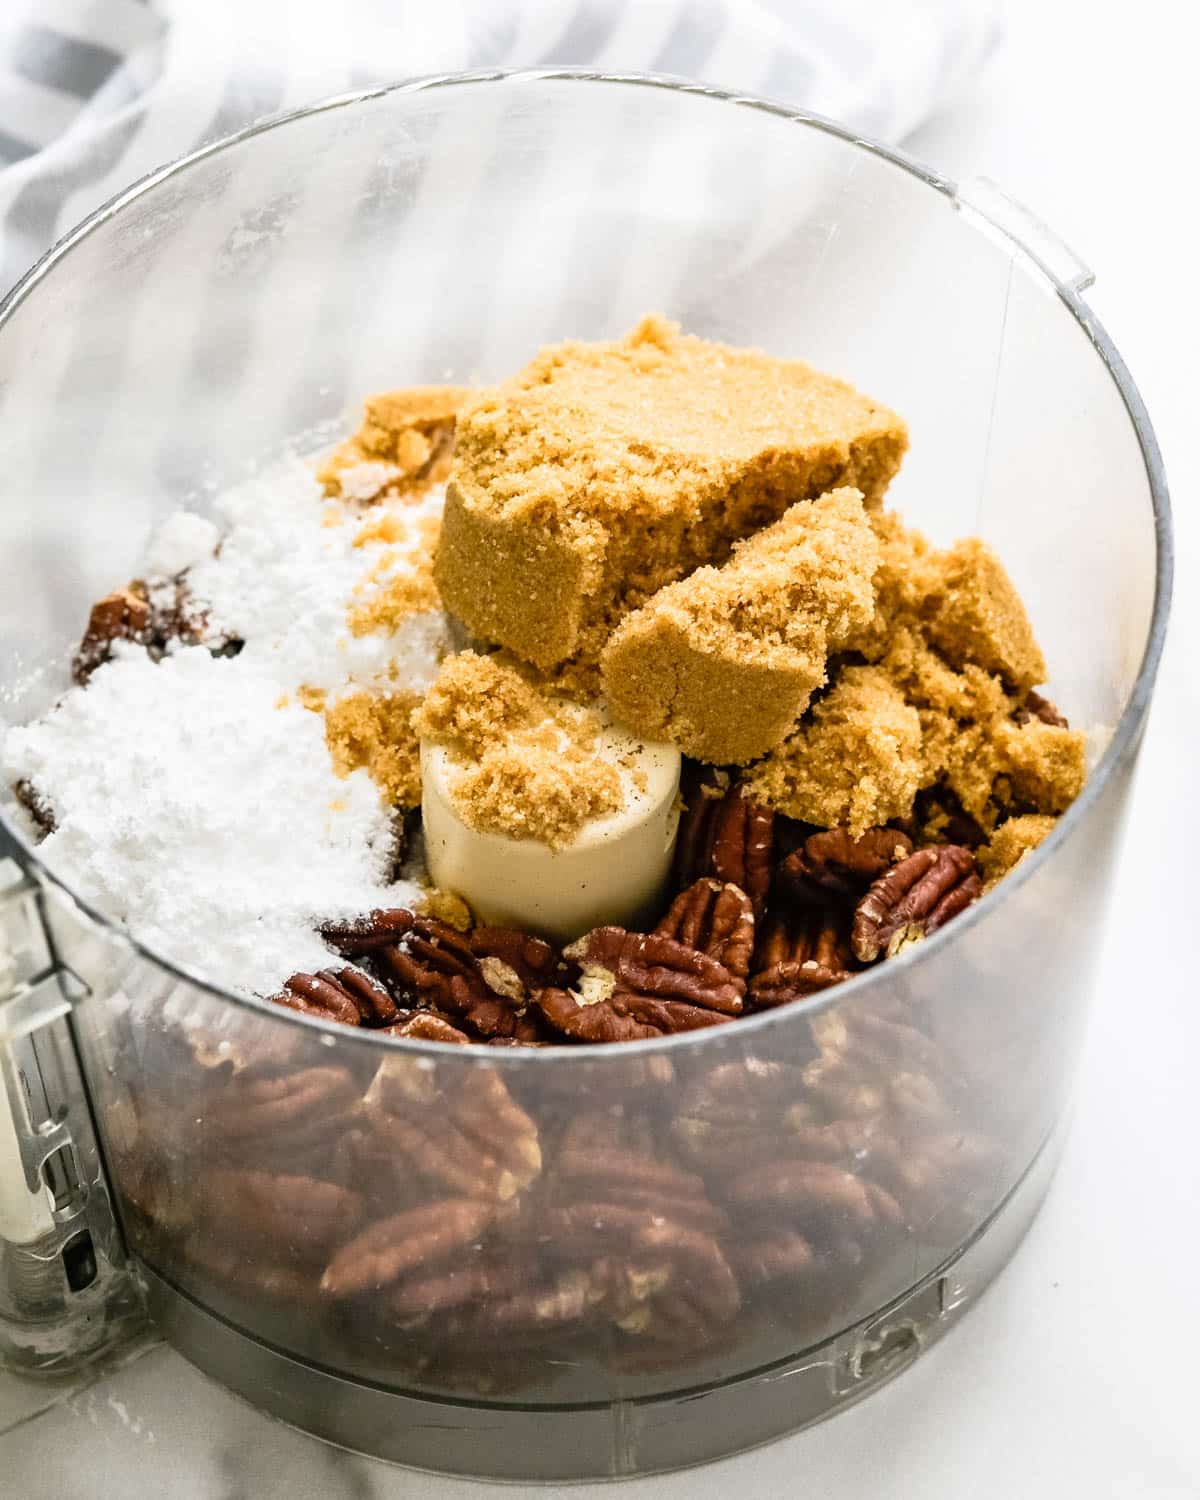 Blend brown sugar and powdered sugar with toasted pecans in a food processor.